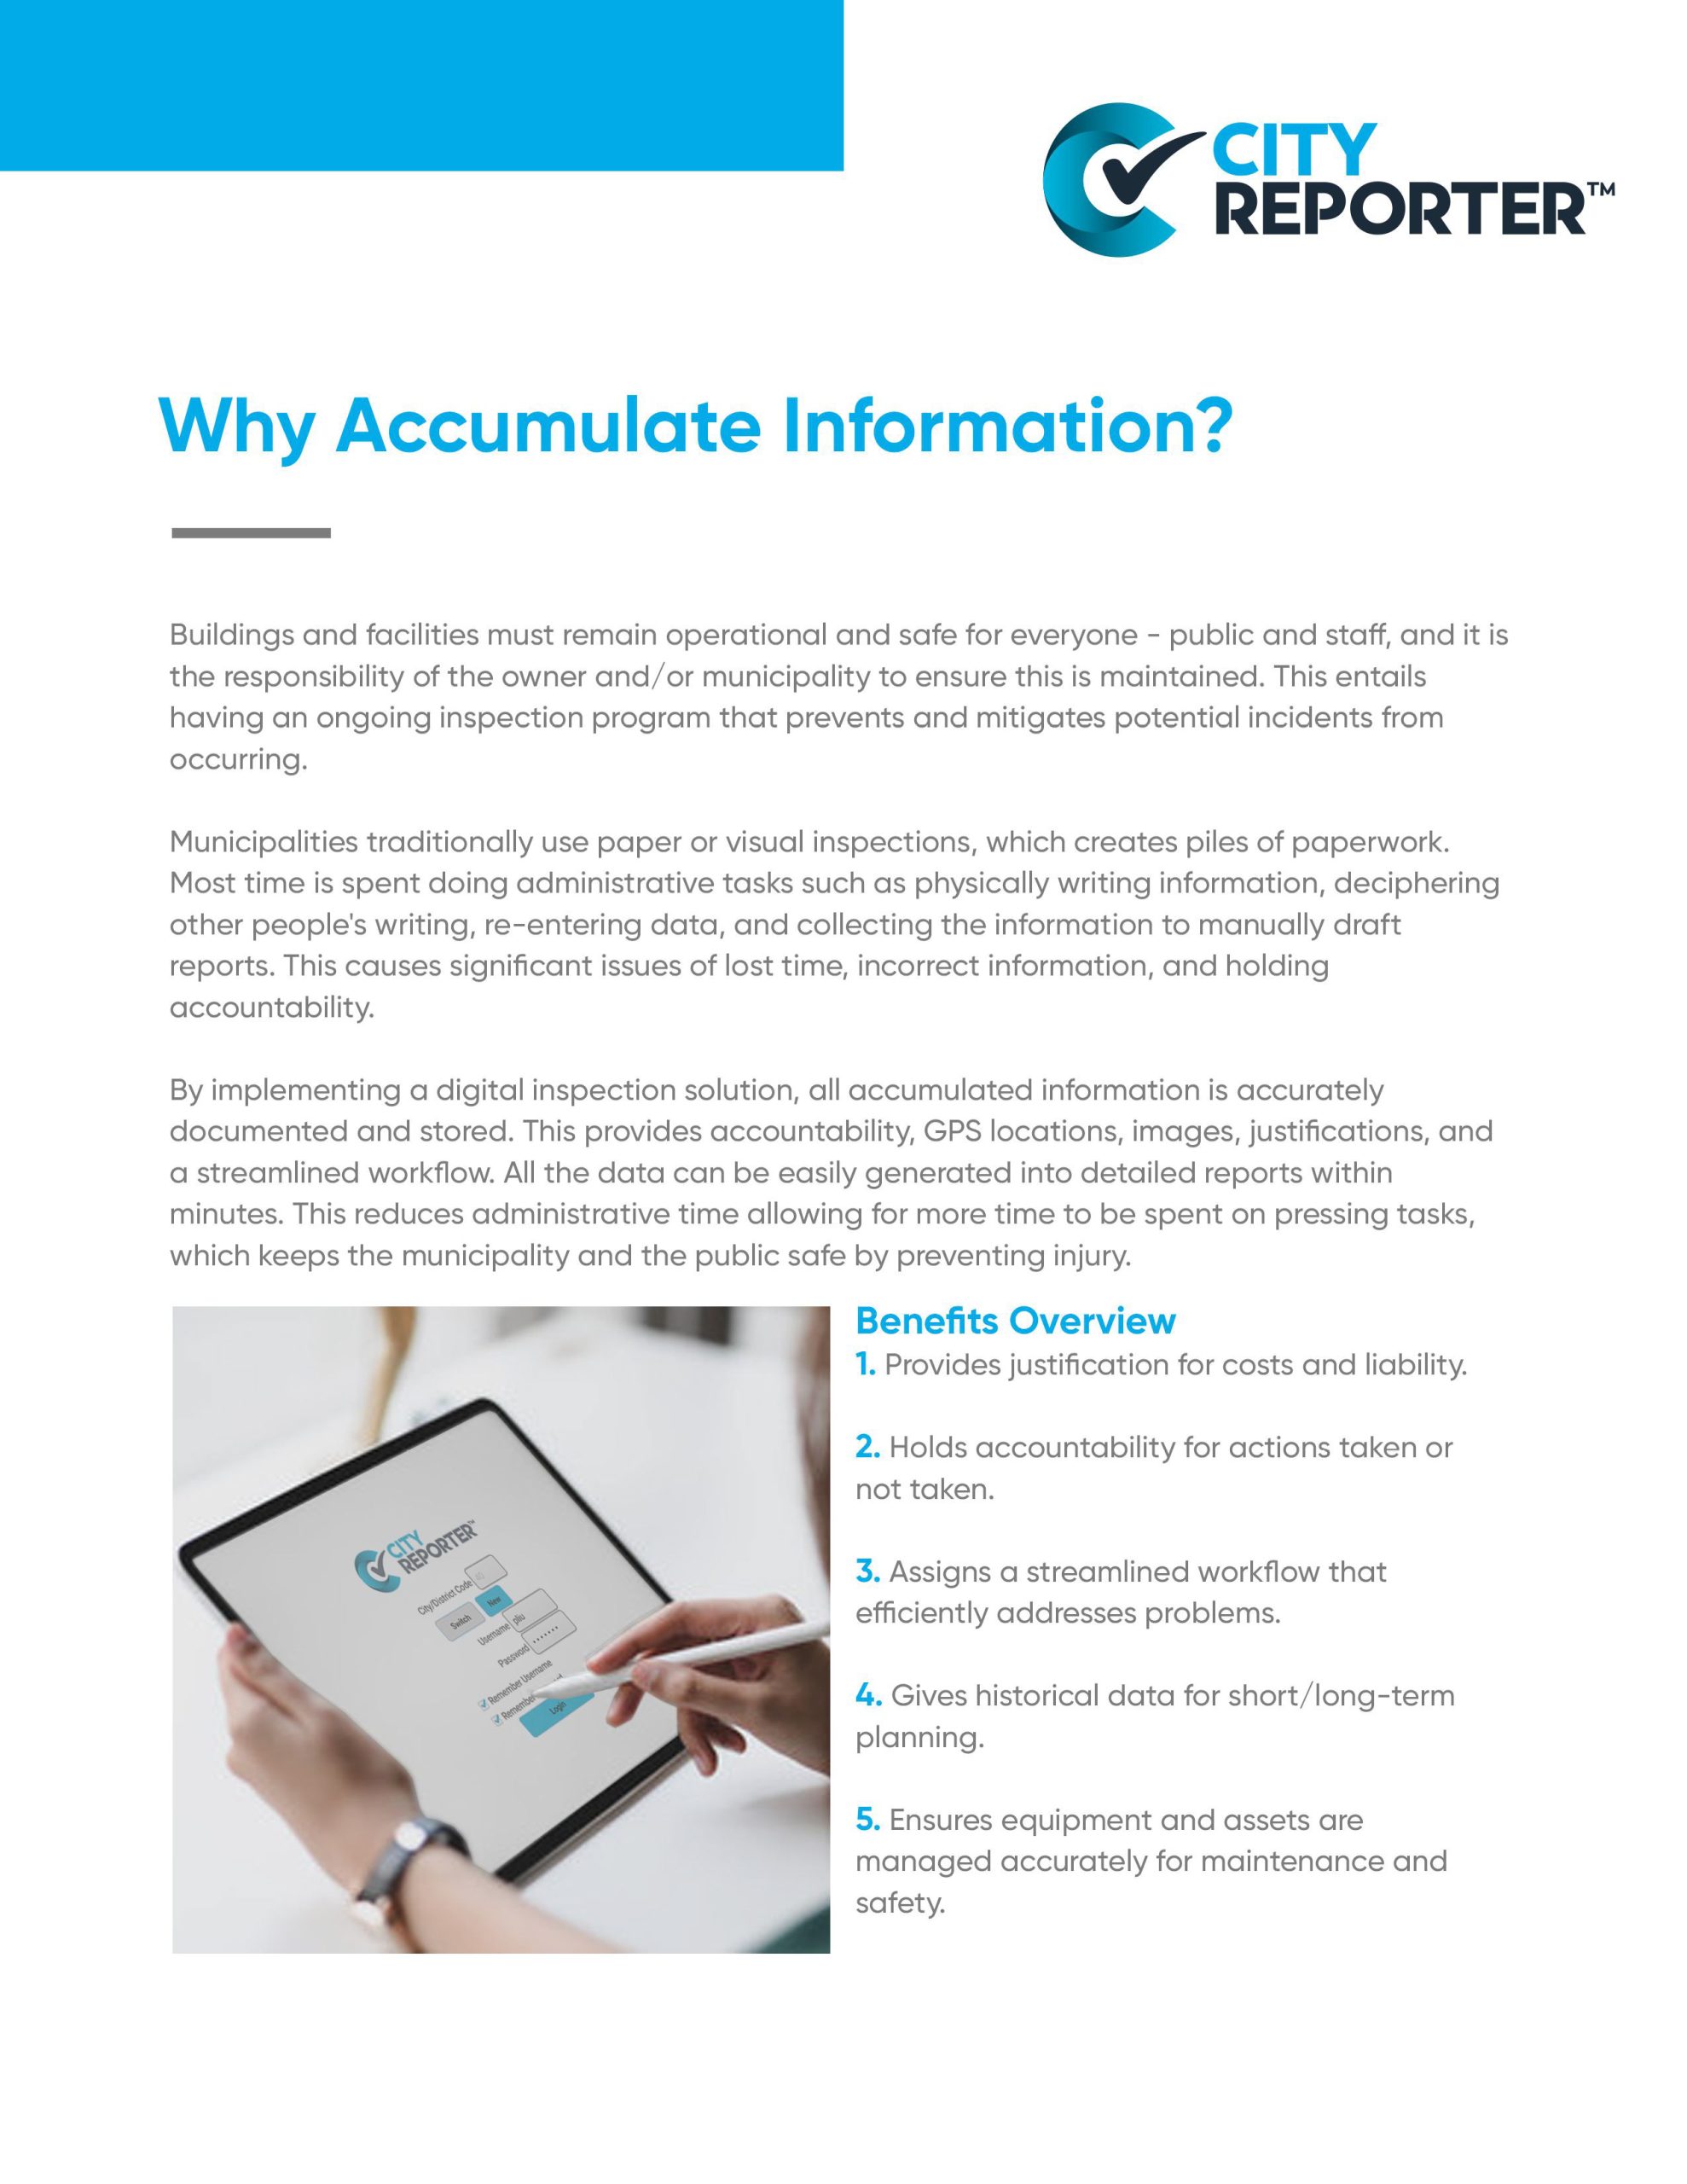 The first page of CityReporter's document - Why Accumulate Information